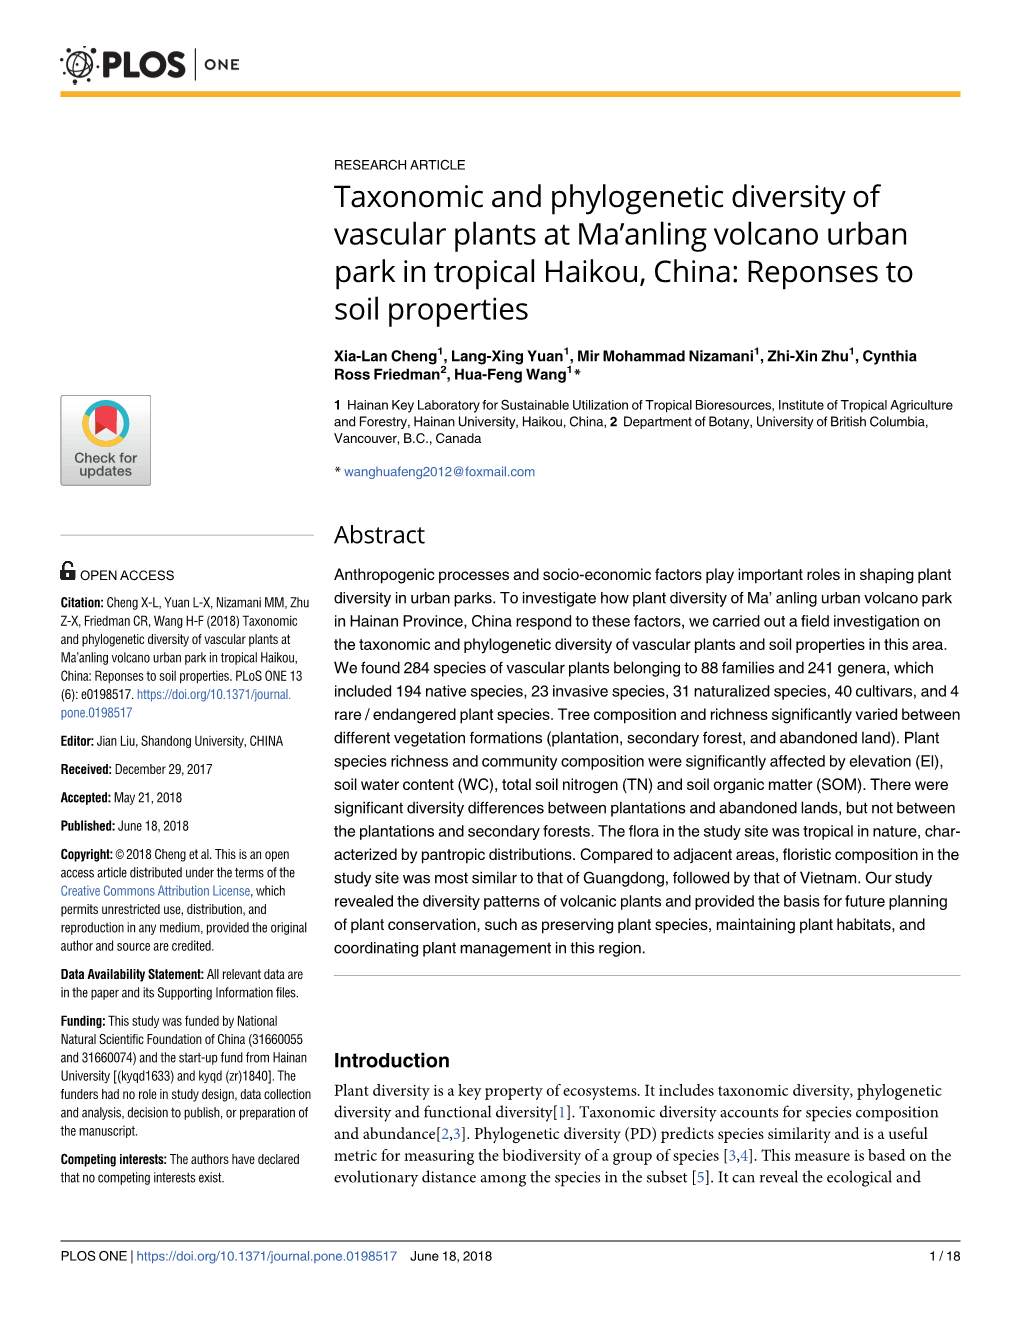 Taxonomic and Phylogenetic Diversity of Vascular Plants at Ma’Anling Volcano Urban Park in Tropical Haikou, China: Reponses to Soil Properties